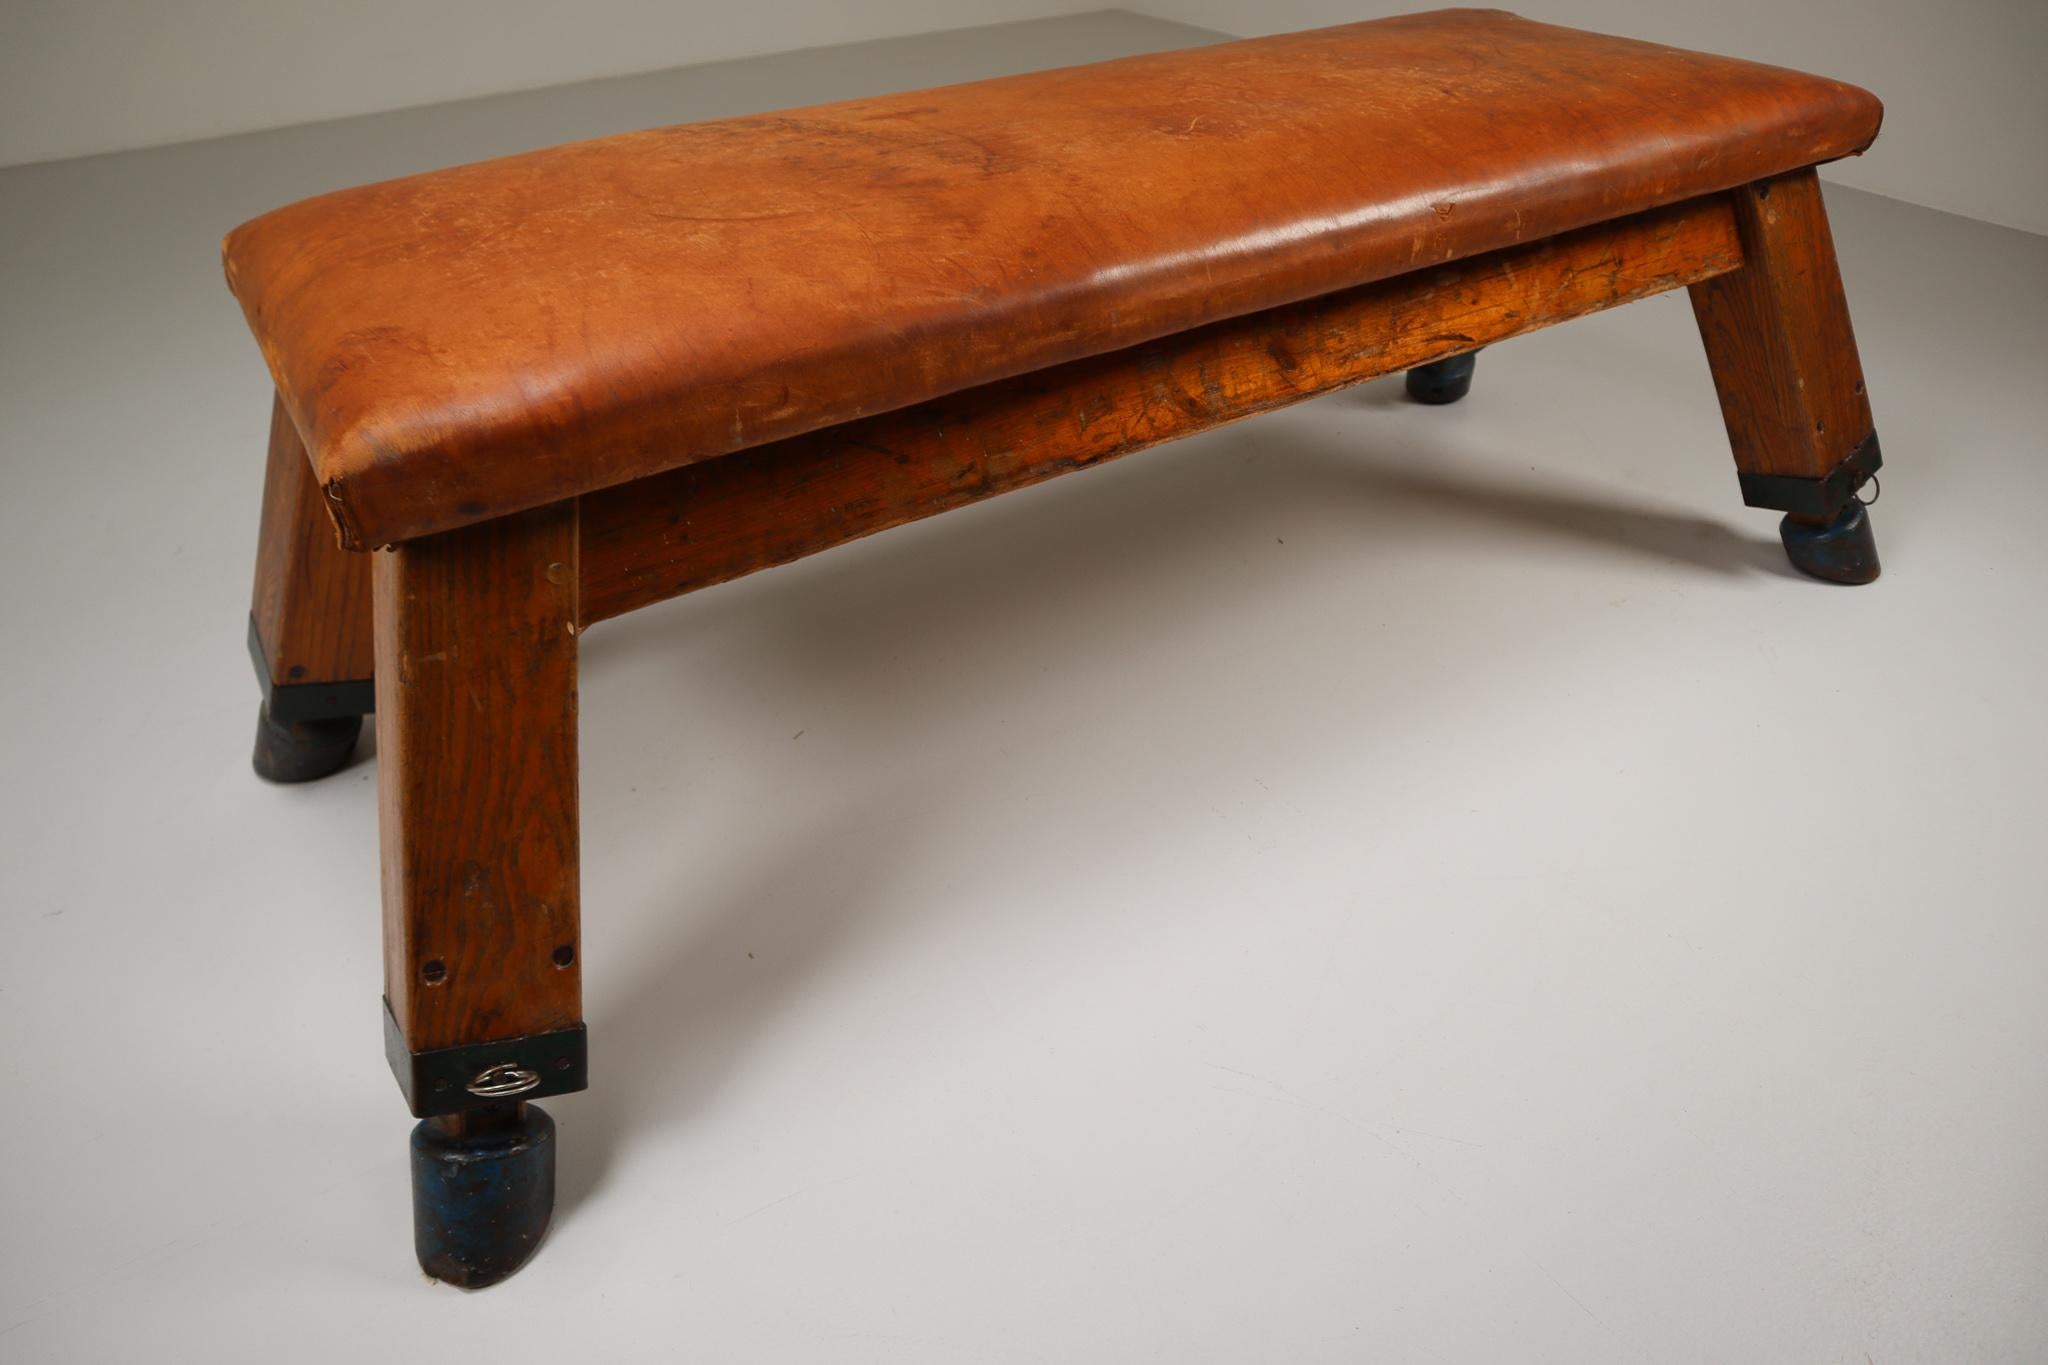 Dutch Wooden Patinated Leather Gym Bench or Table, circa 1950s